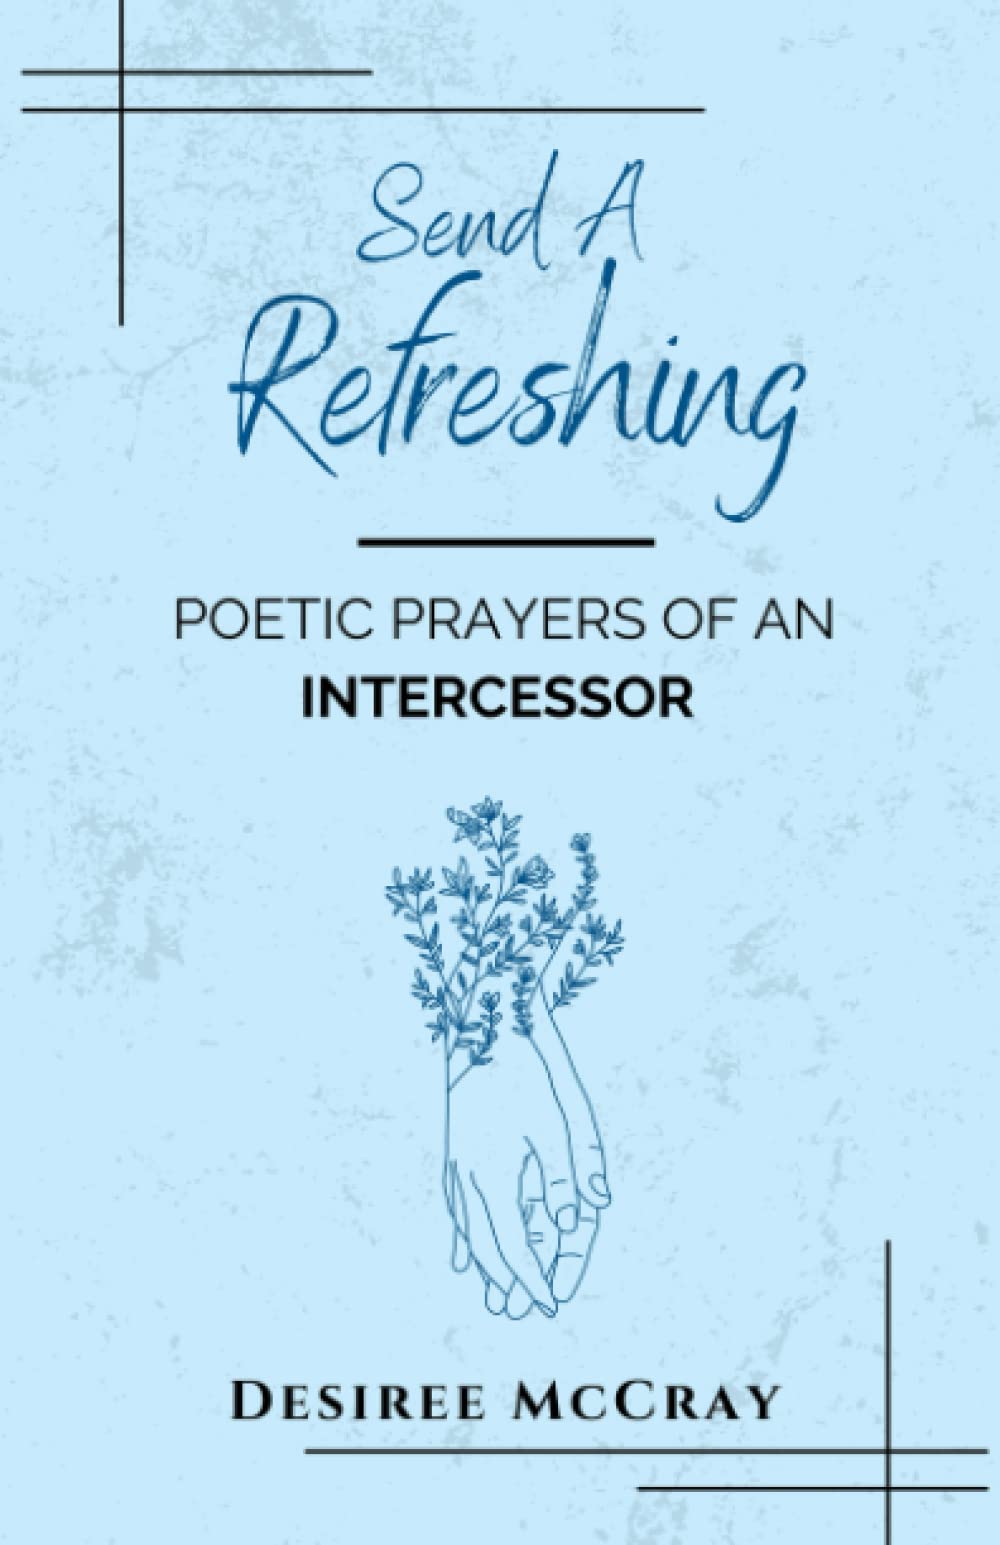 Pastor Desiree McCray Releases Poetry Book "Send A Refreshing: Poetic Prayers of an Intercessor" to Rave Reviews